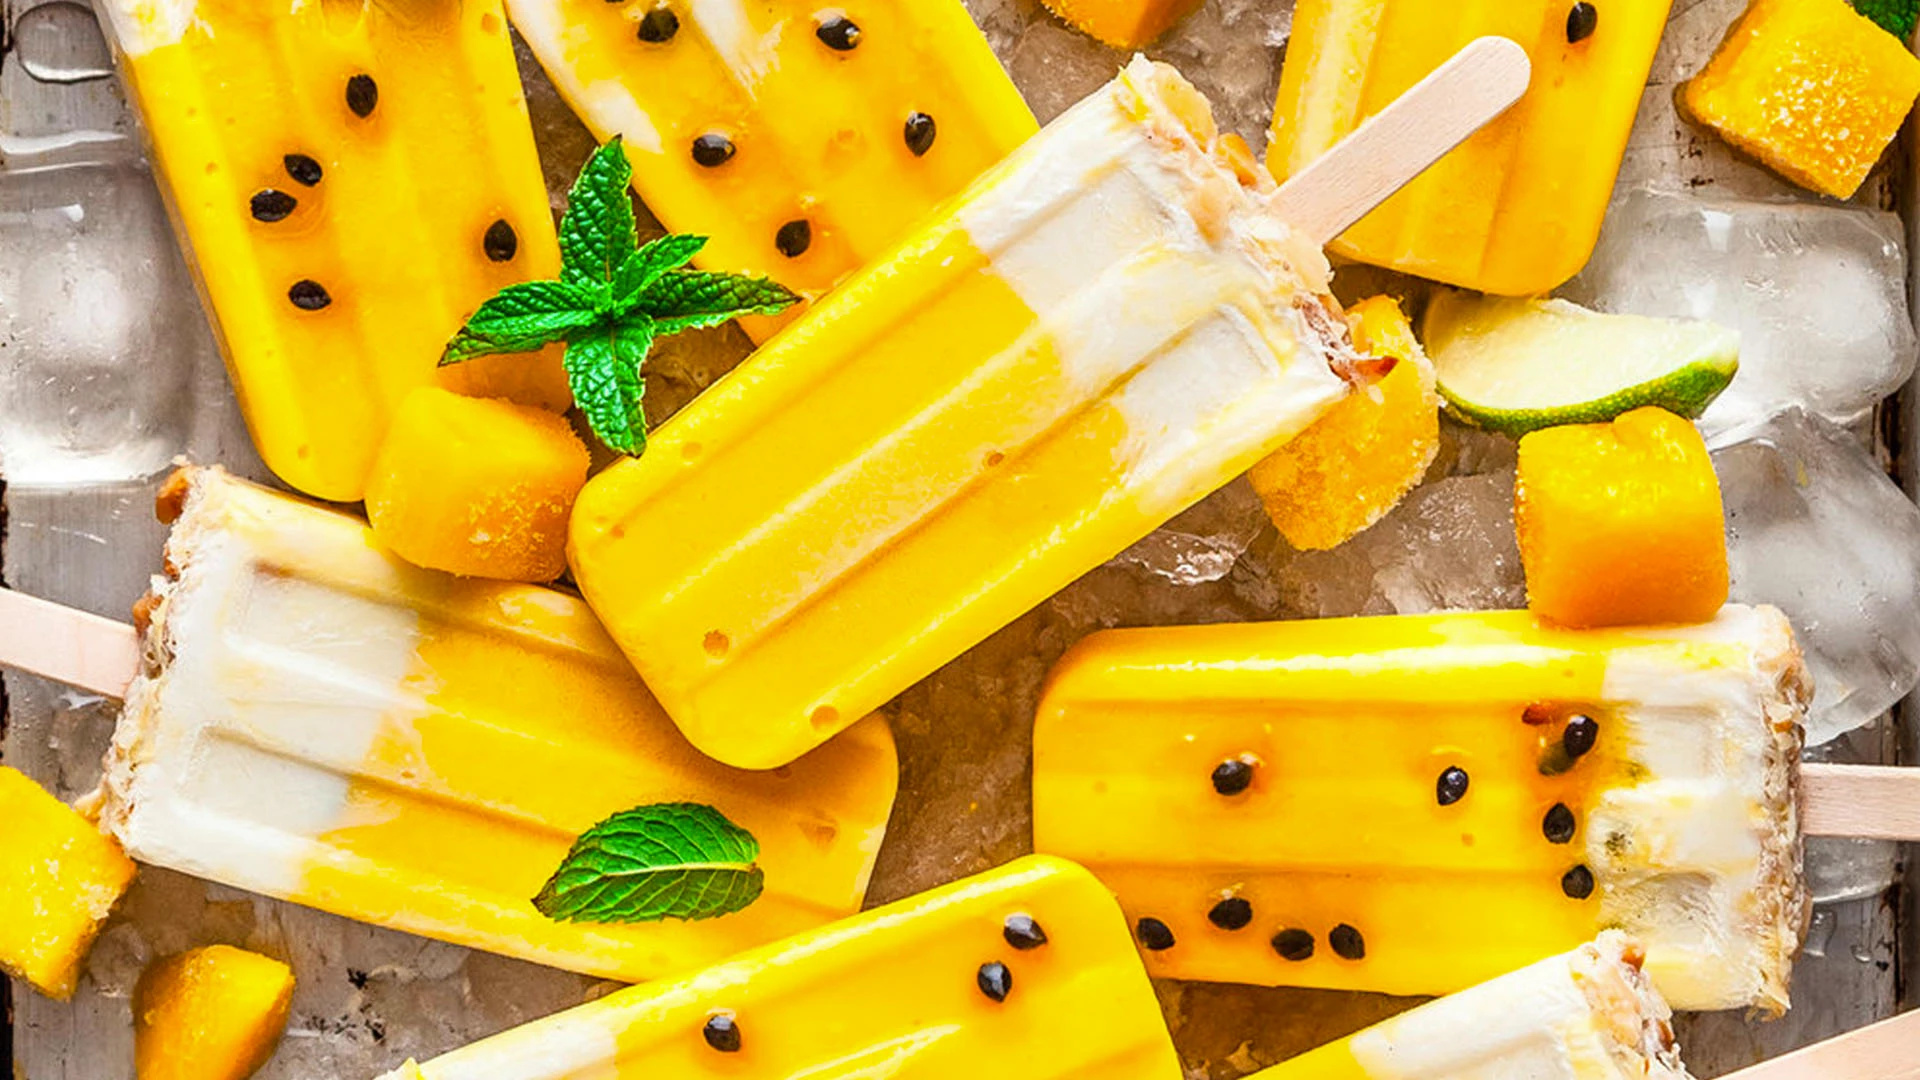 Delicious fruit popsicle recipes, Cool and refreshing, Perfect for summer, Bursting with flavor, 1920x1080 Full HD Desktop